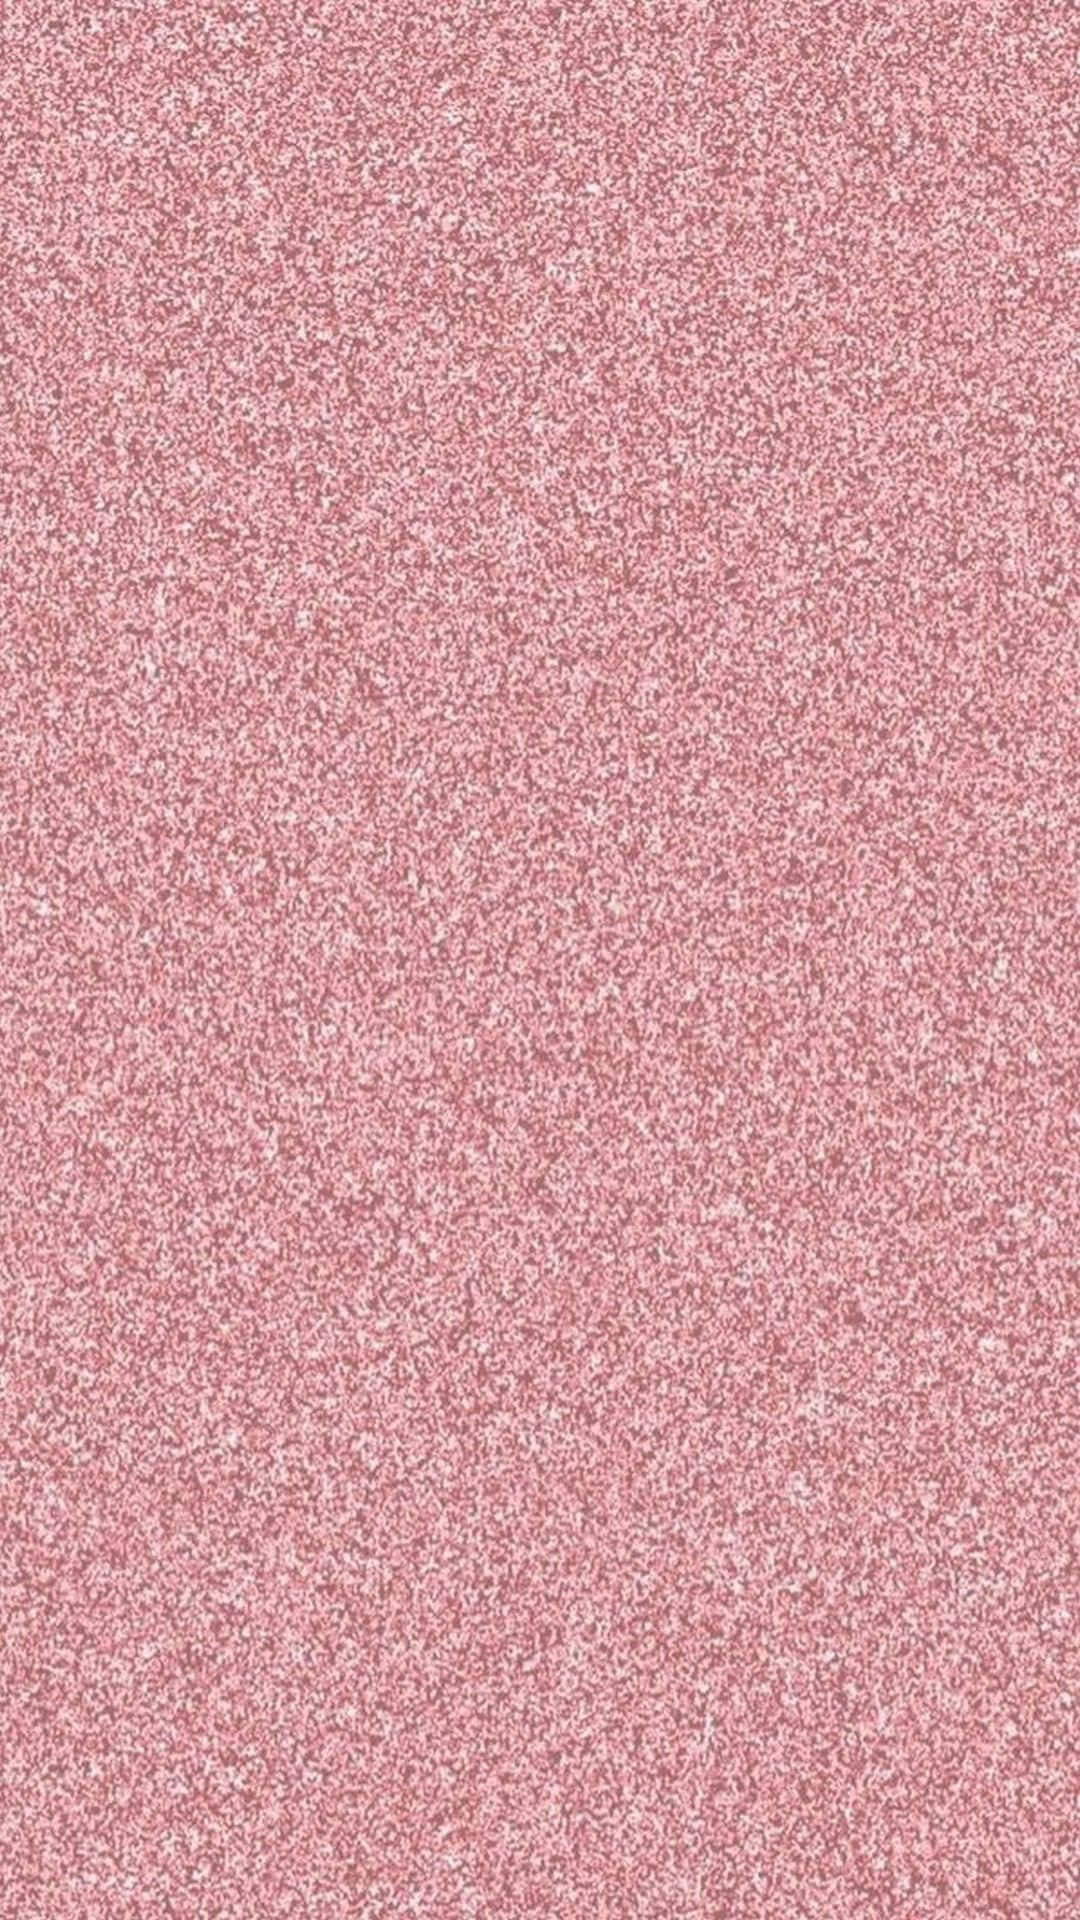 Sparkling and Shiny Glittery Background